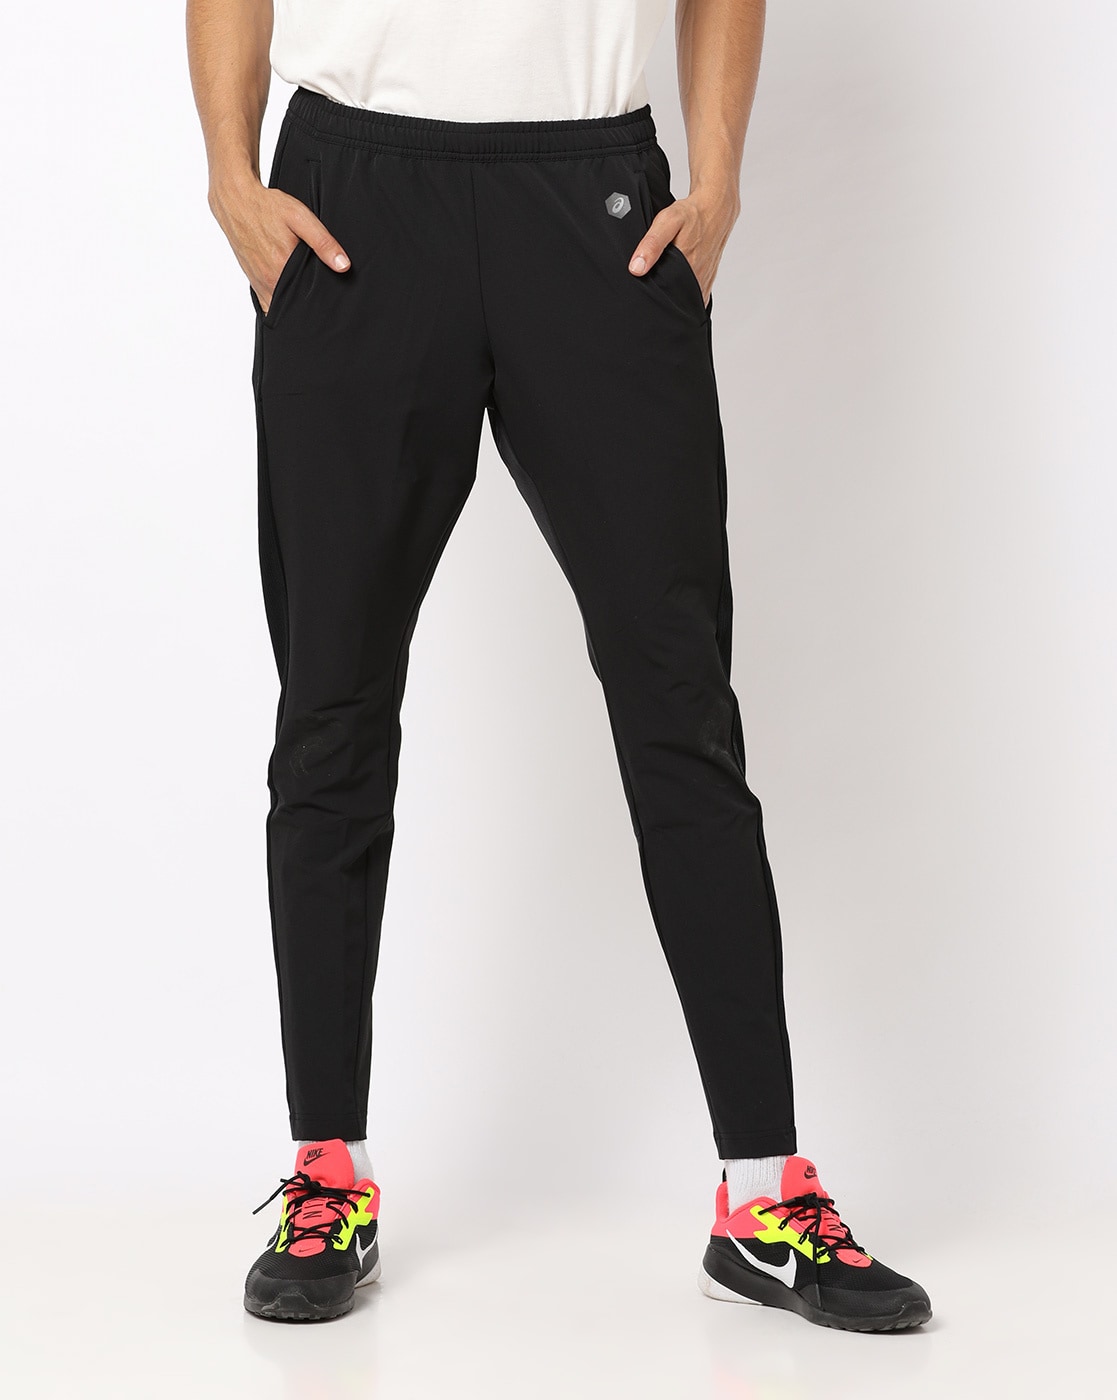 Best Offers on Sports track pants upto 2071 off  Limited period sale   AJIO